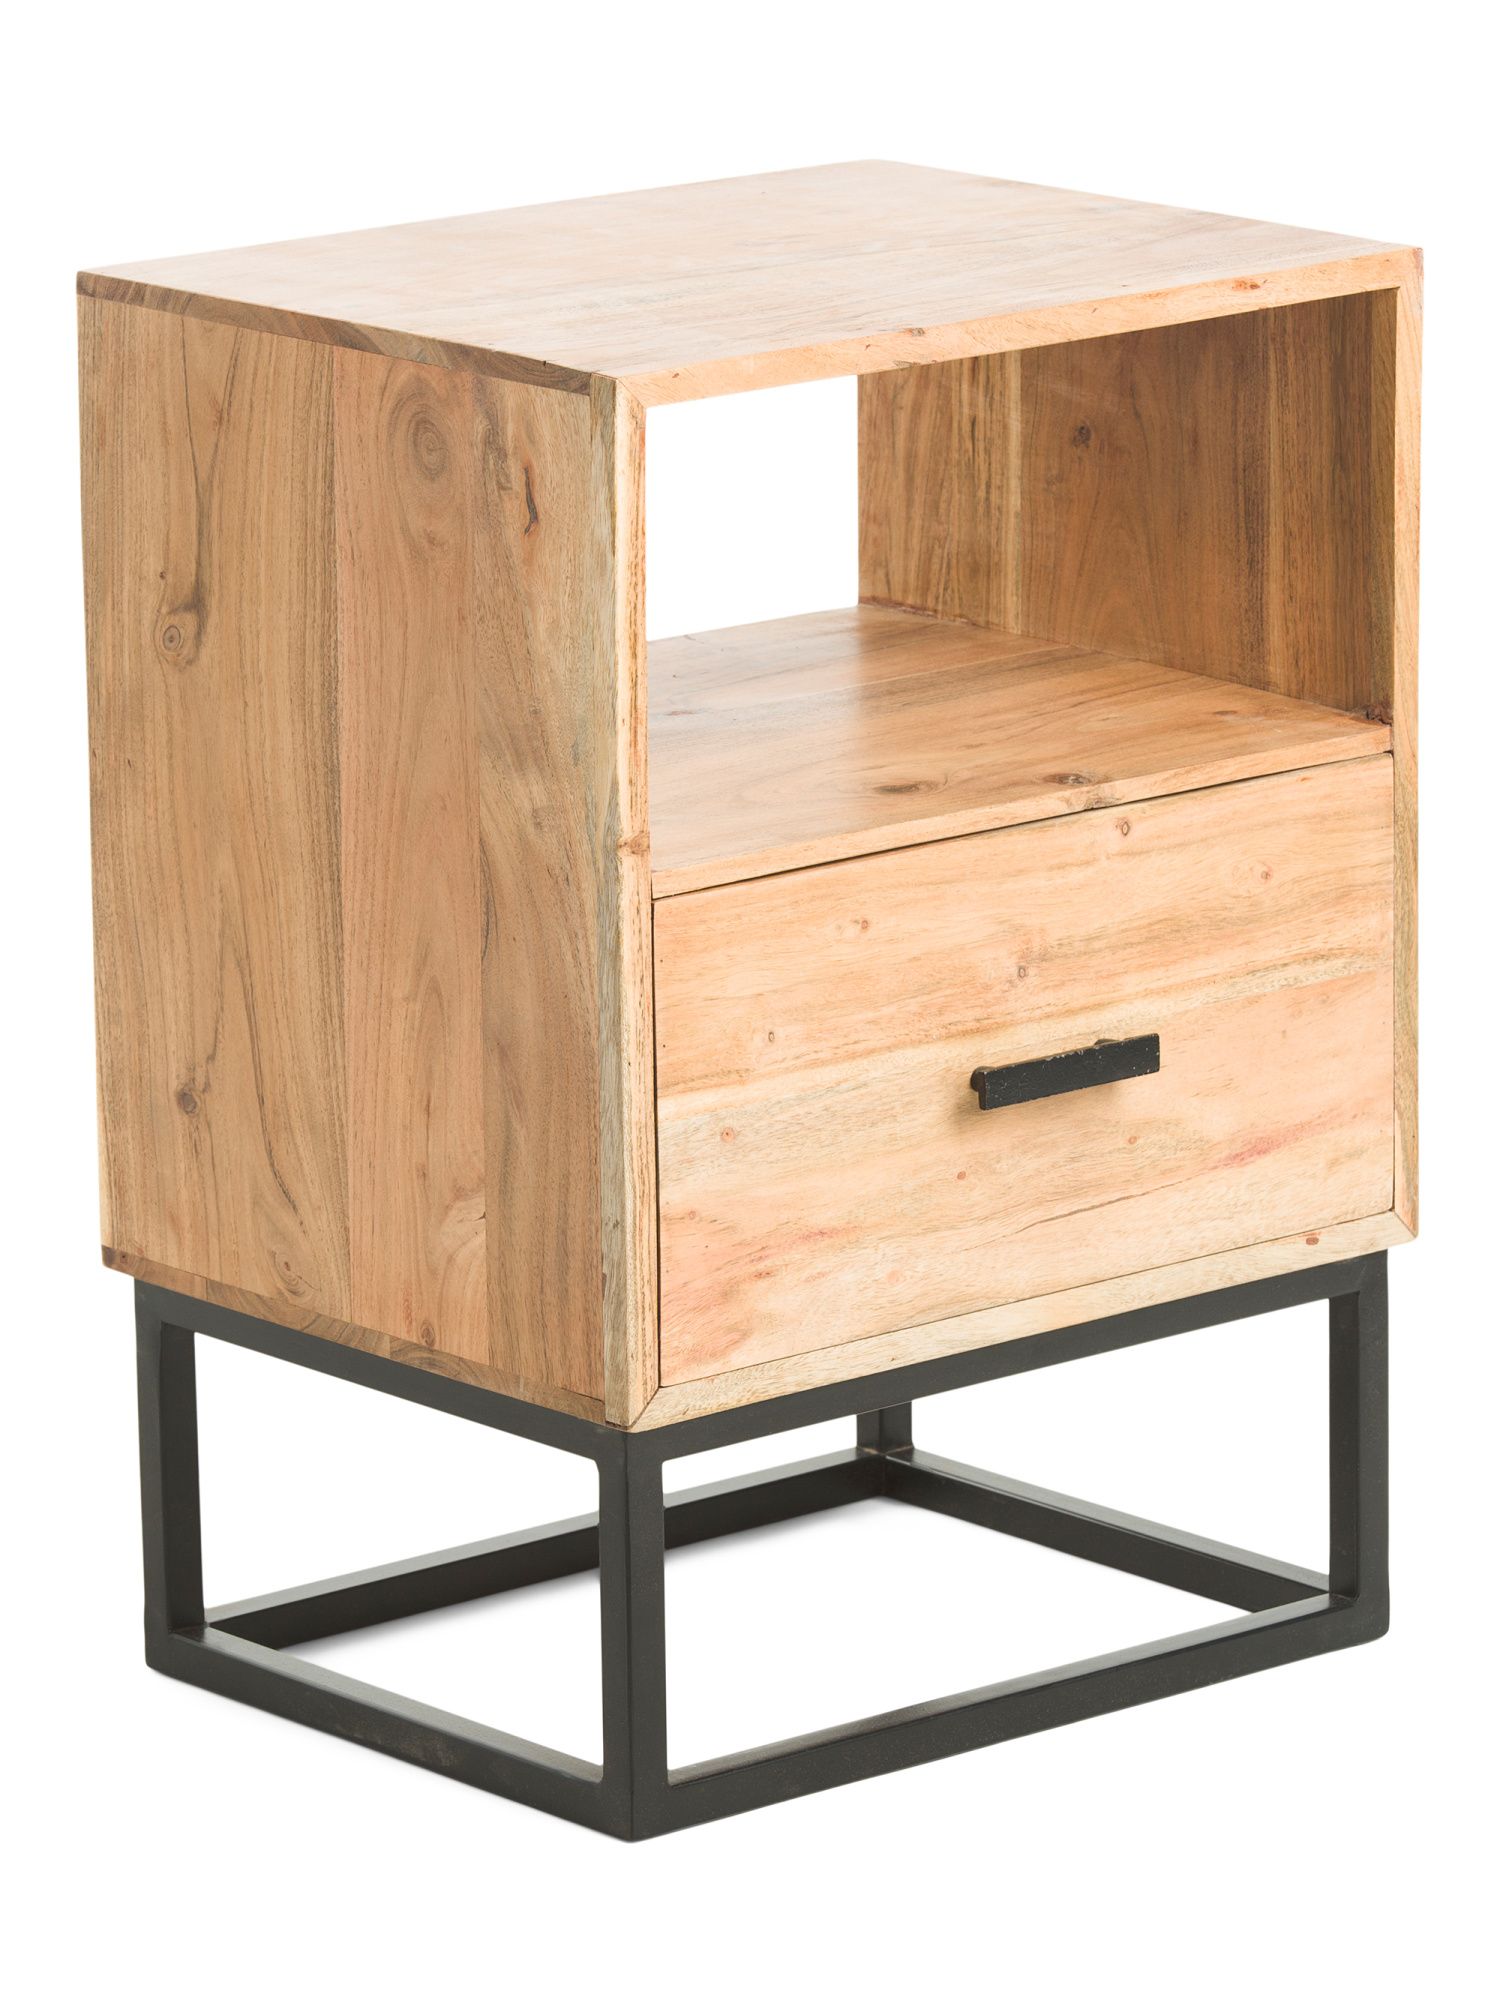 Wooden Side Table With Drawer | TJ Maxx